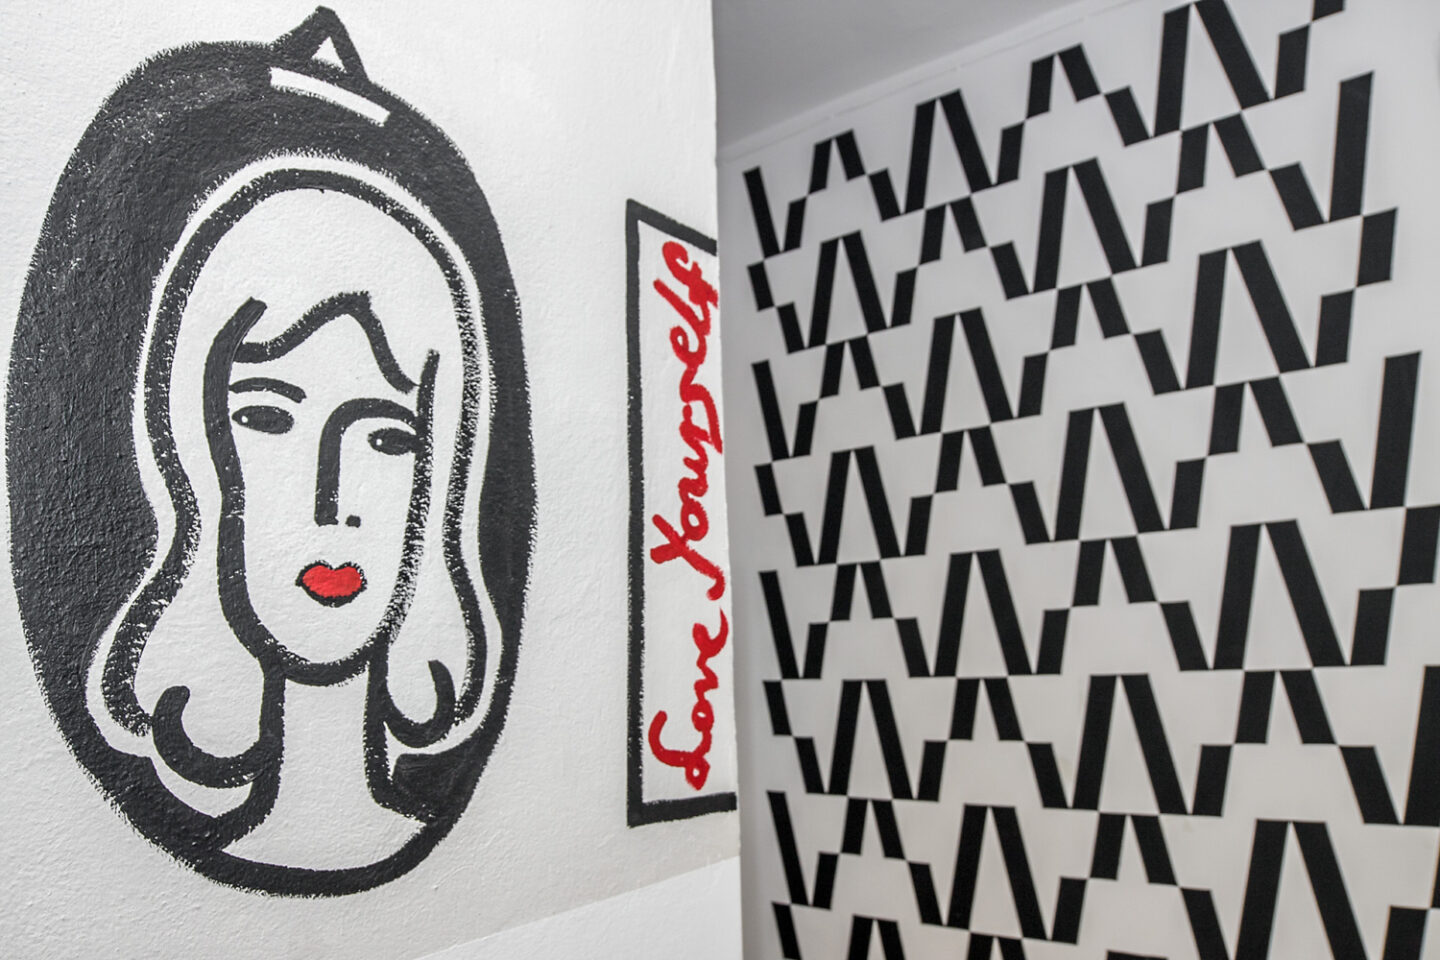 walls at the WOK office – on the left a portrait of a woman and a red sign saying “Love yourself”, in the background a repeat pattern made of black Ws